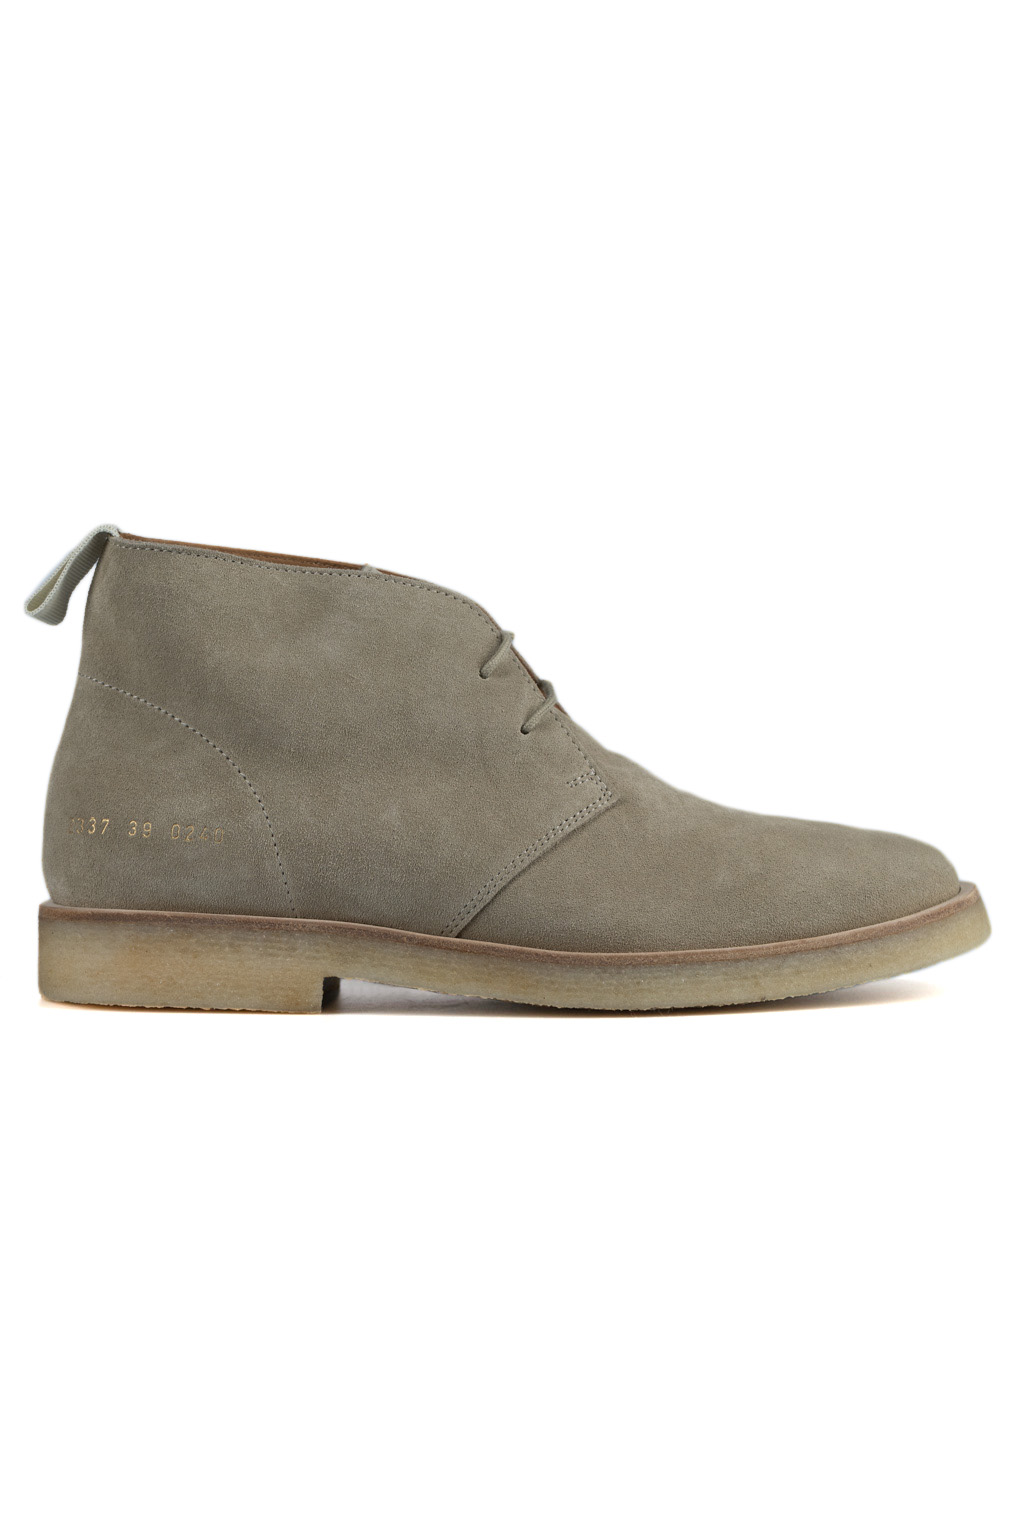 Common Projects Chukka - Taupe